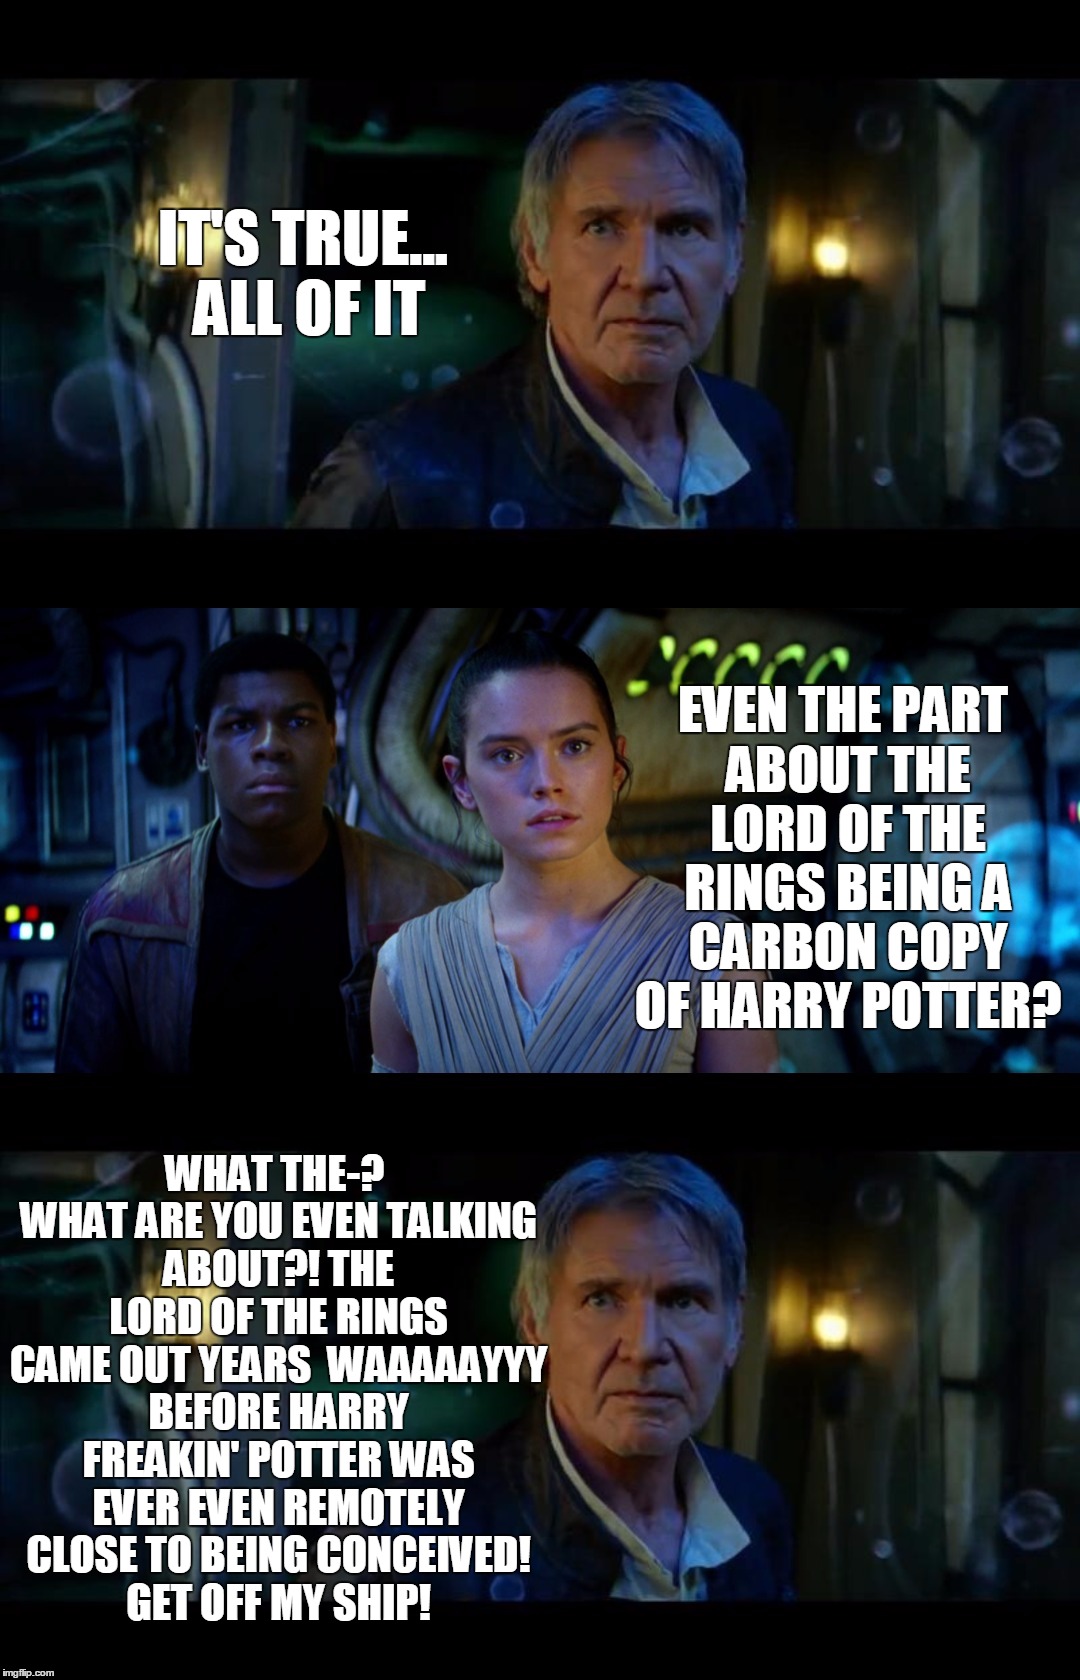 It's True All of It Han Solo | IT'S TRUE... ALL OF IT; EVEN THE PART ABOUT THE LORD OF THE RINGS BEING A CARBON COPY OF HARRY POTTER? WHAT THE-? WHAT ARE YOU EVEN TALKING ABOUT?! THE LORD OF THE RINGS CAME OUT YEARS  WAAAAAYYY BEFORE HARRY FREAKIN' POTTER WAS EVER EVEN REMOTELY CLOSE TO BEING CONCEIVED! GET OFF MY SHIP! | image tagged in memes,it's true all of it han solo | made w/ Imgflip meme maker